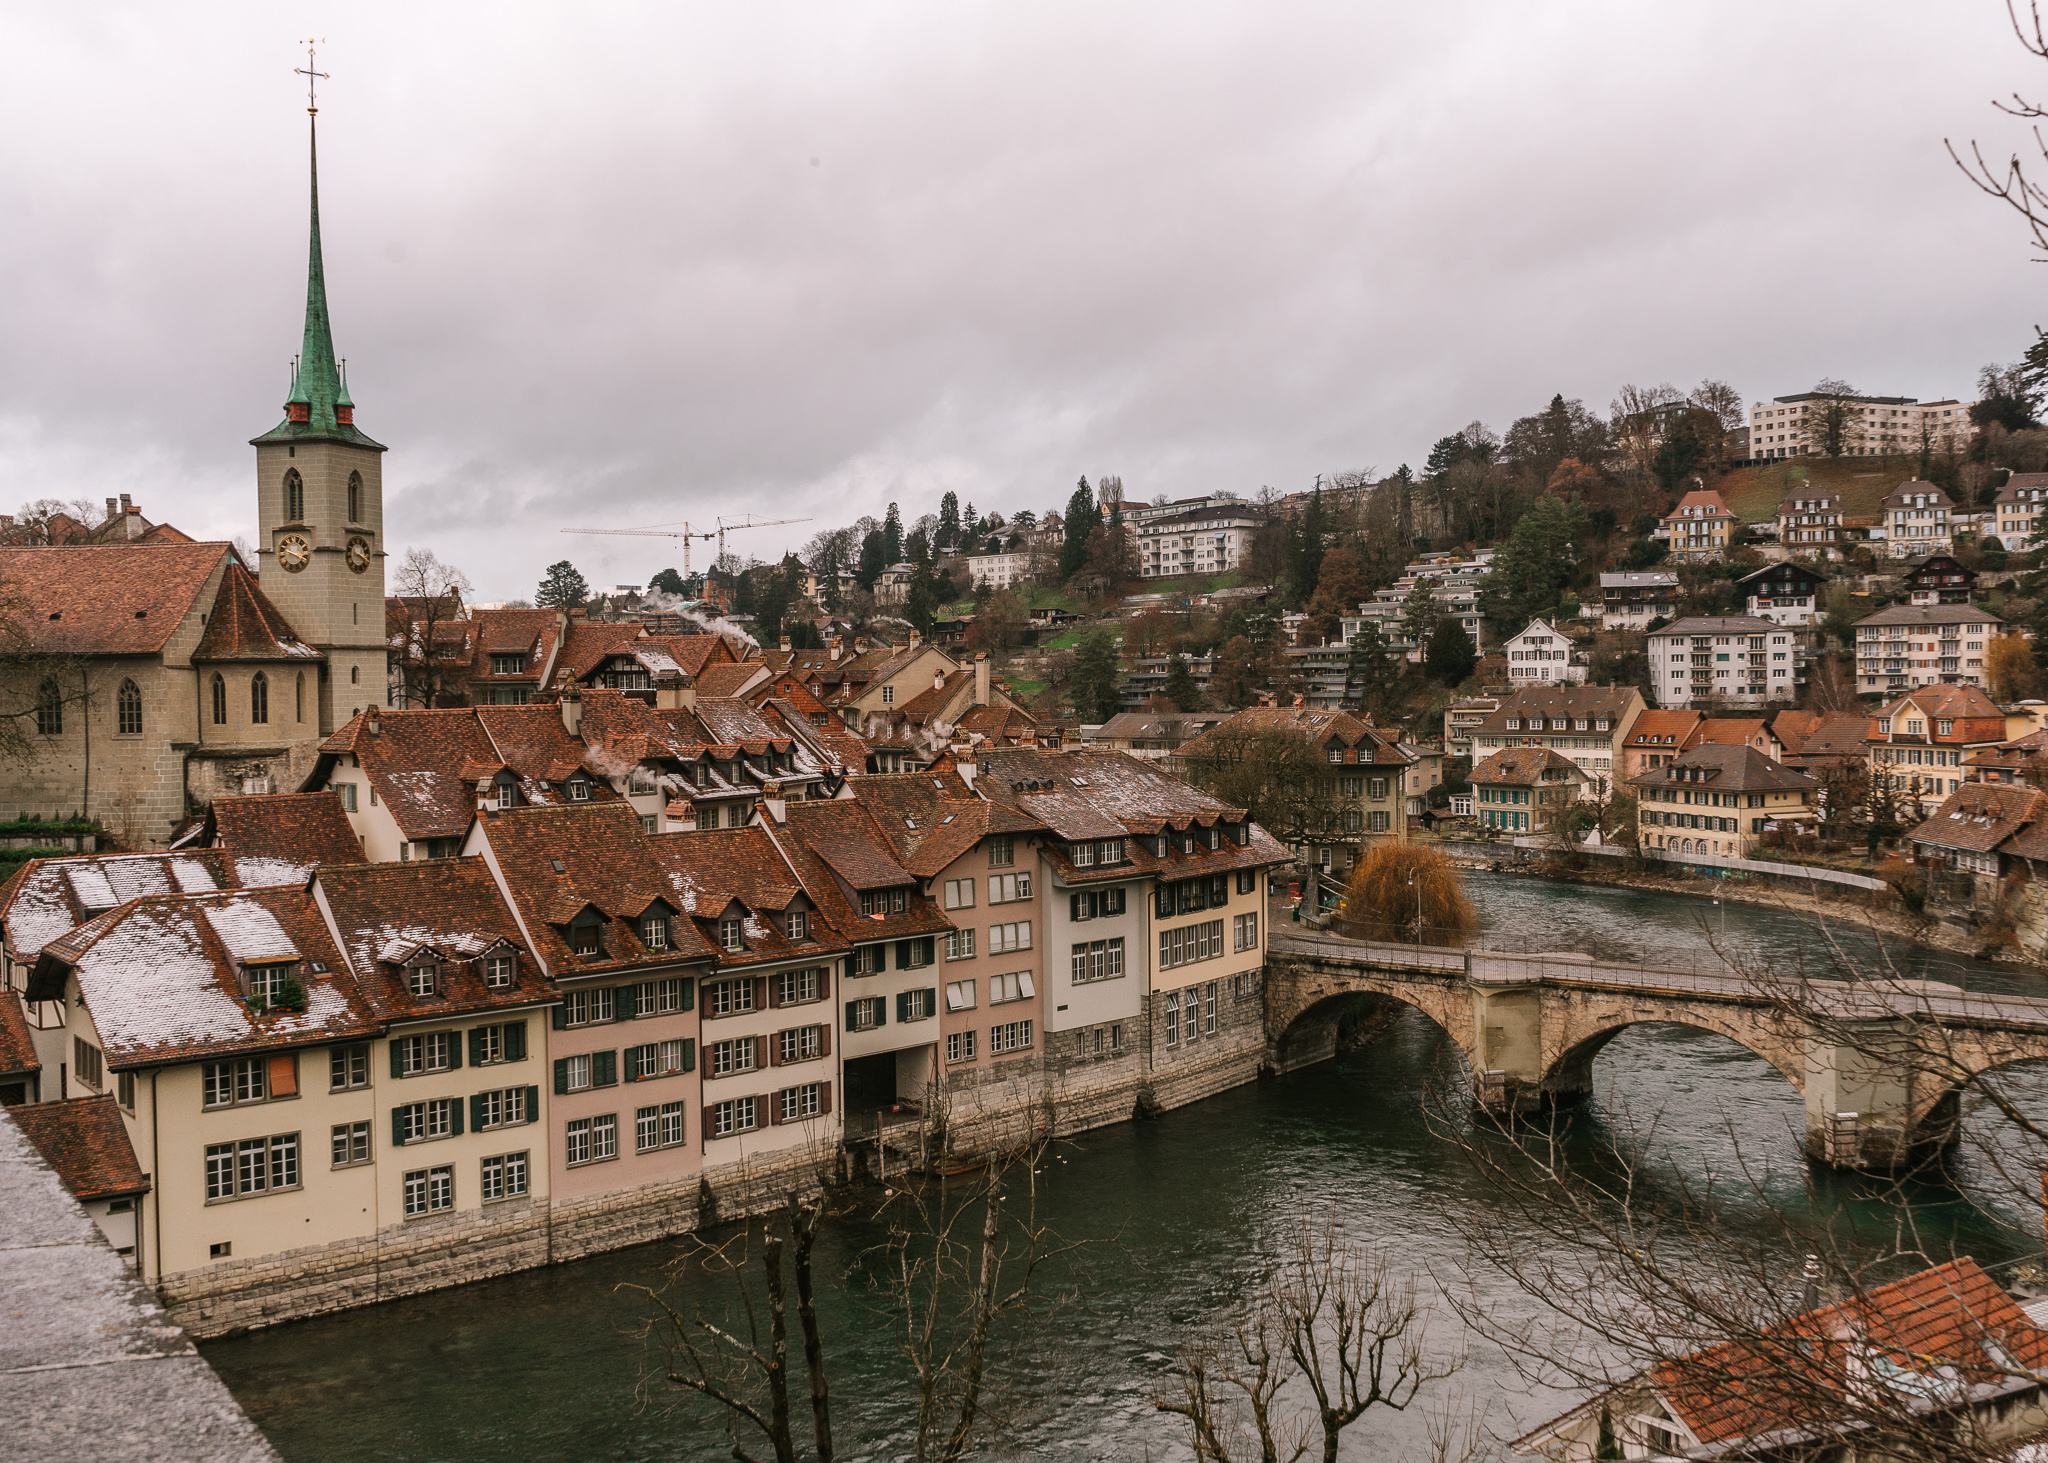 A view from above of the Old Town in Bern on a winter day. There is a bridge crossing the river into the town, with old homes lining the river front, and a single green church tower rising above.